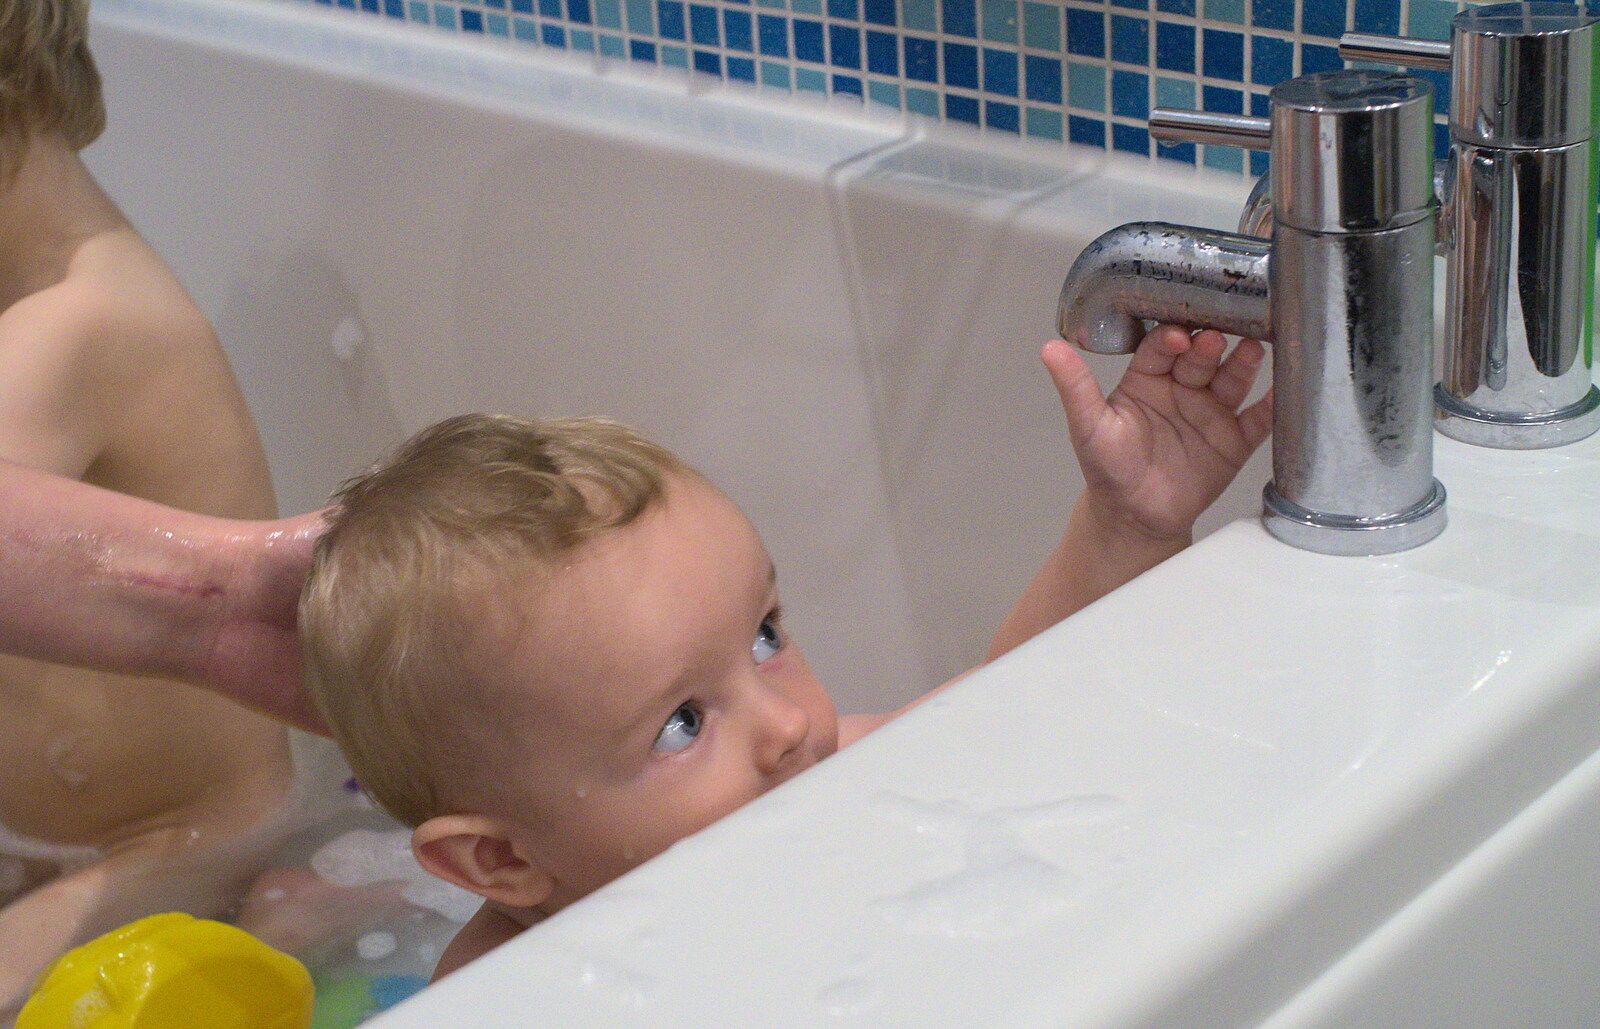 Harry pokes around with the taps at bath-time from Sis Comes to Visit, Eye, Suffolk - 18th November 2012